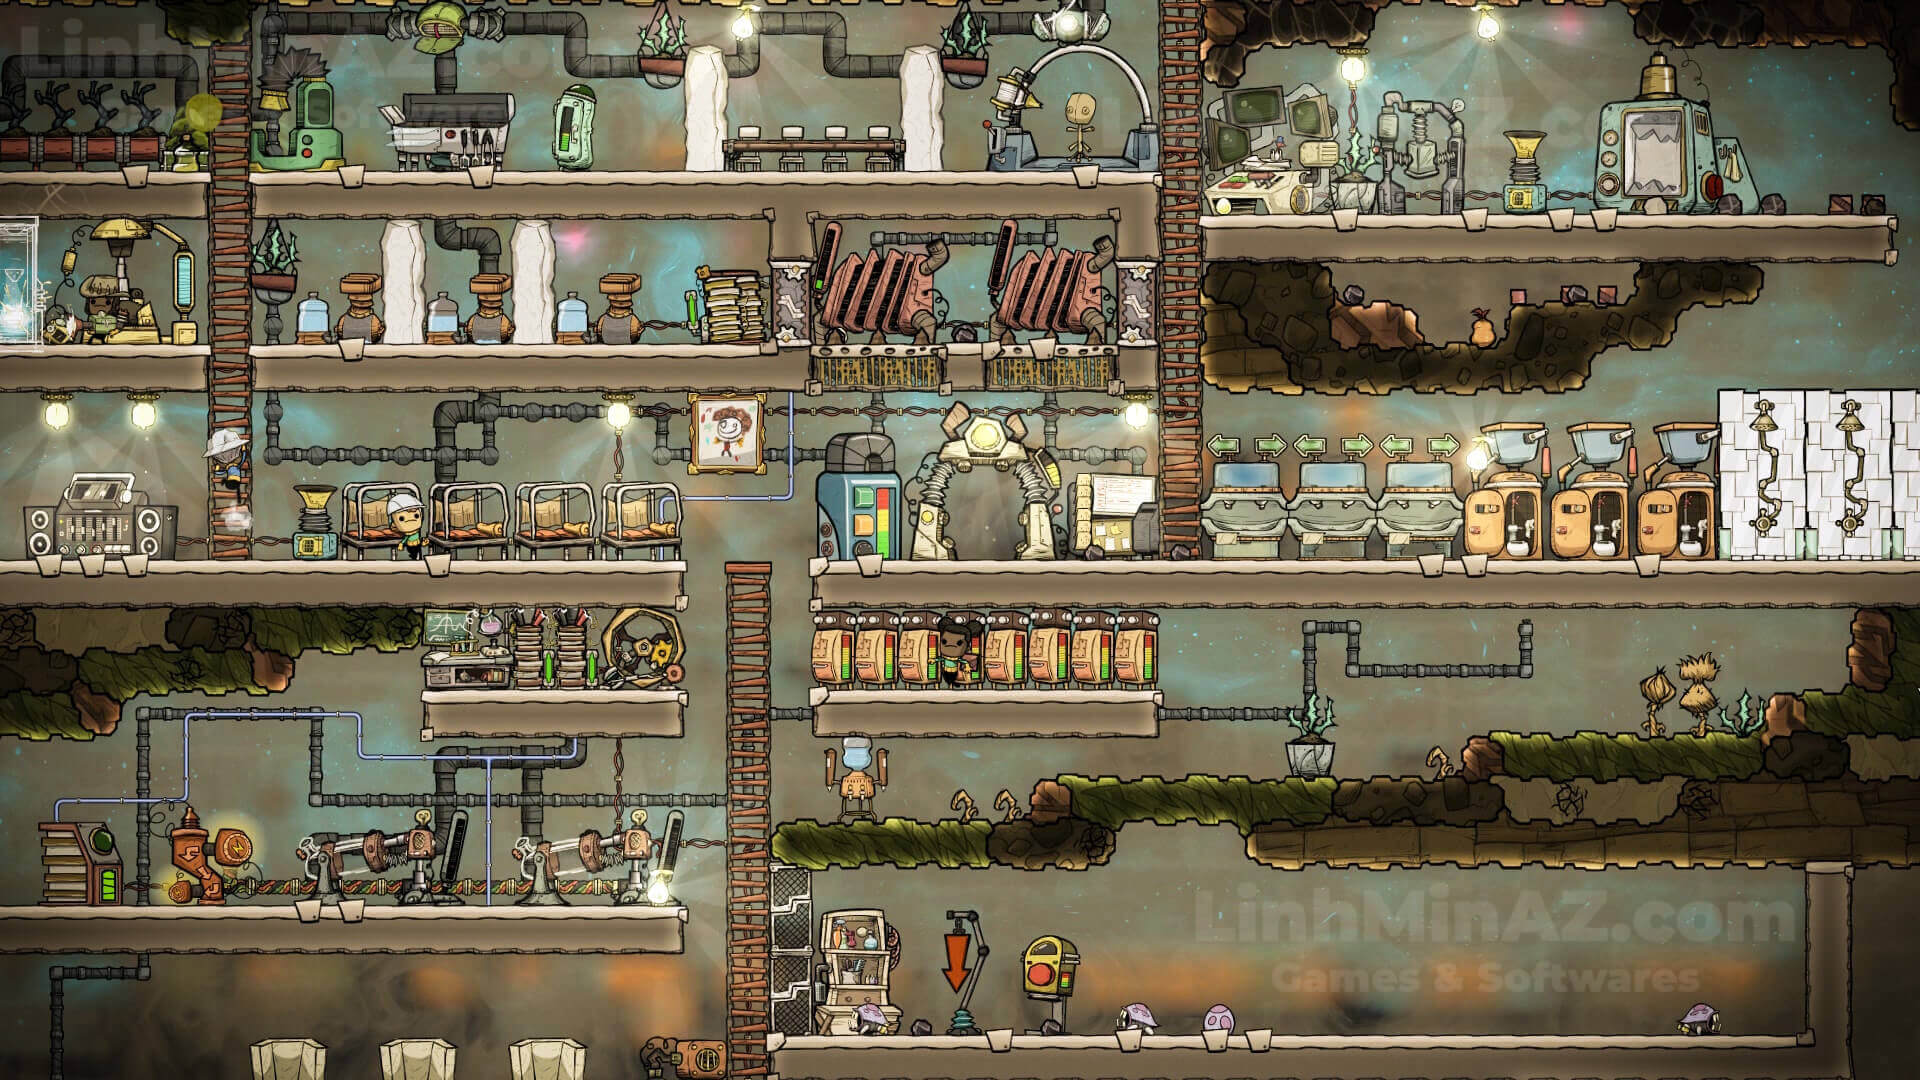 OXYGEN NOT INCLUDED CRACK